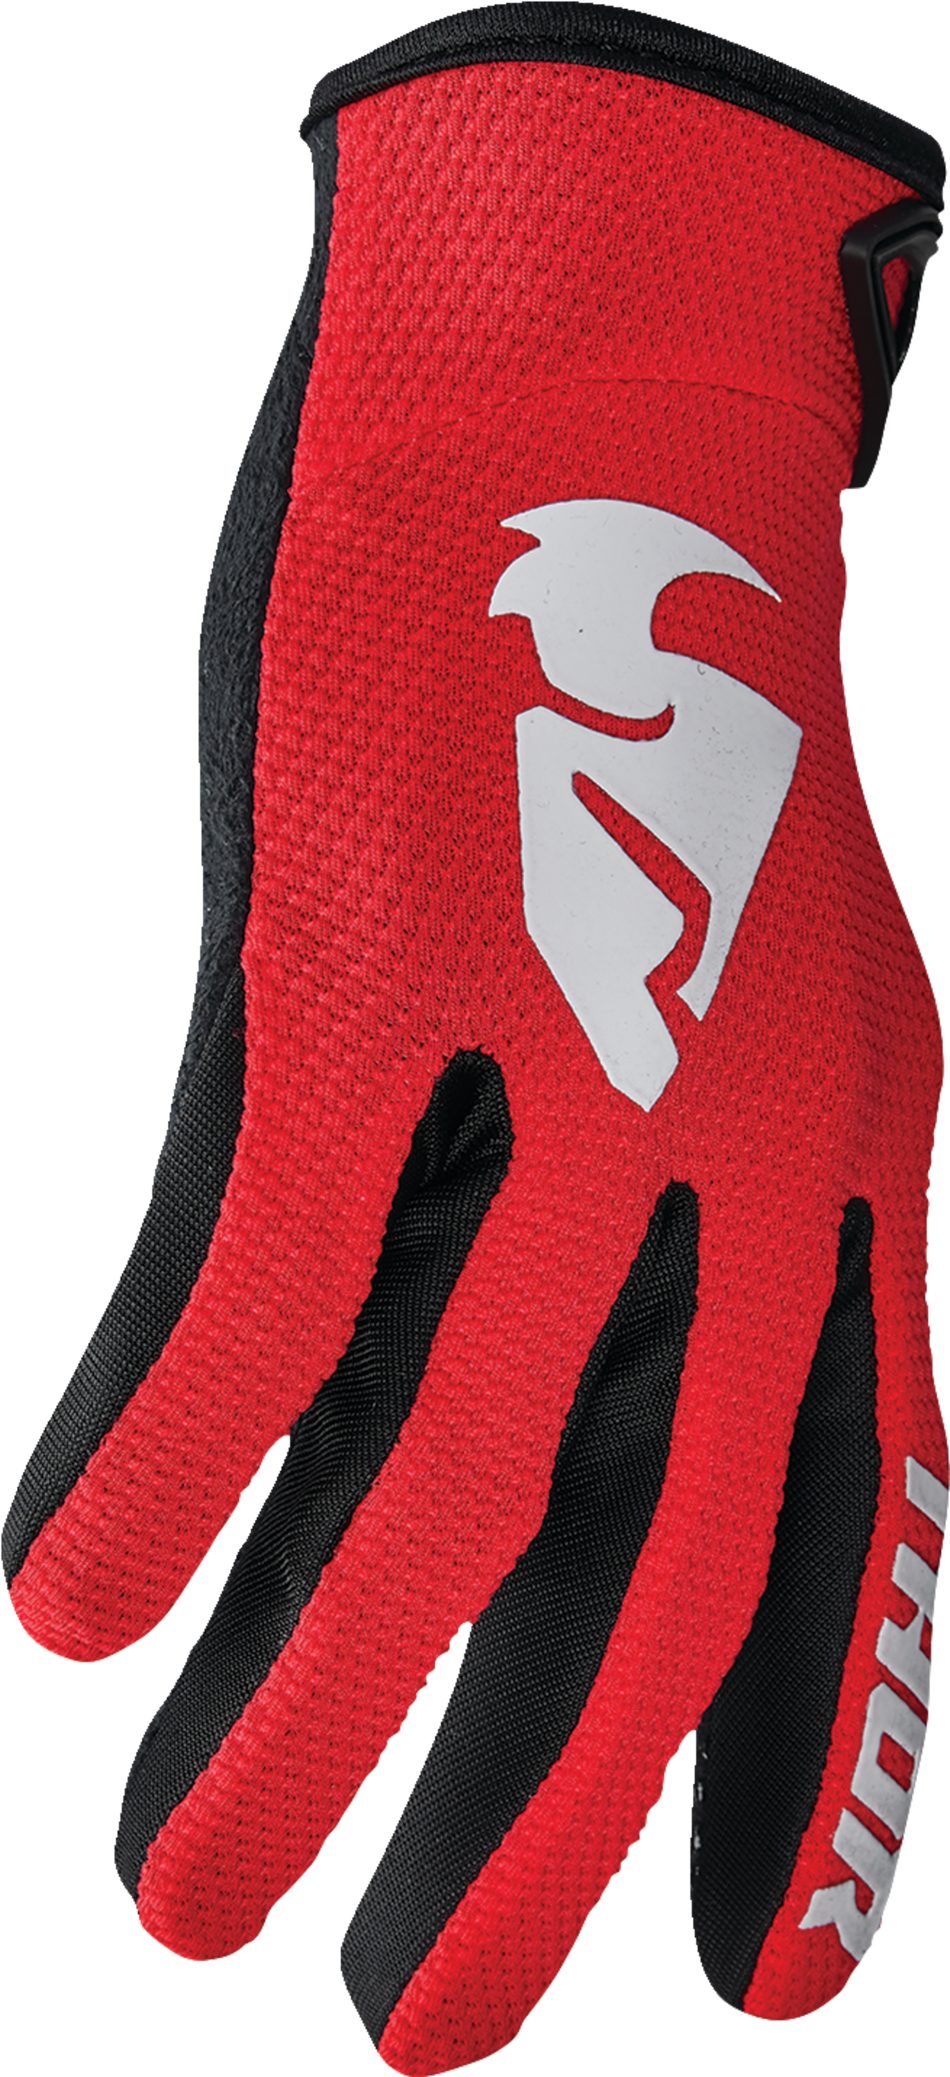 THOR Sector Gloves - Red/White - 2XL 3330-7272